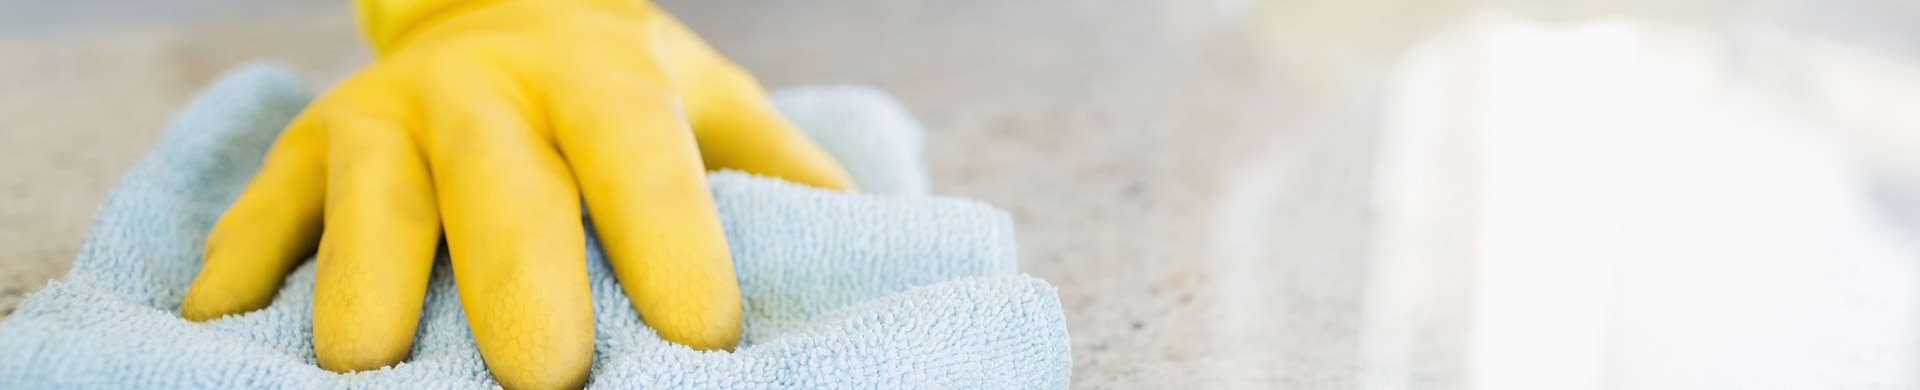 Homeowner Cleans Countertop With Rag and Yellow Gloves